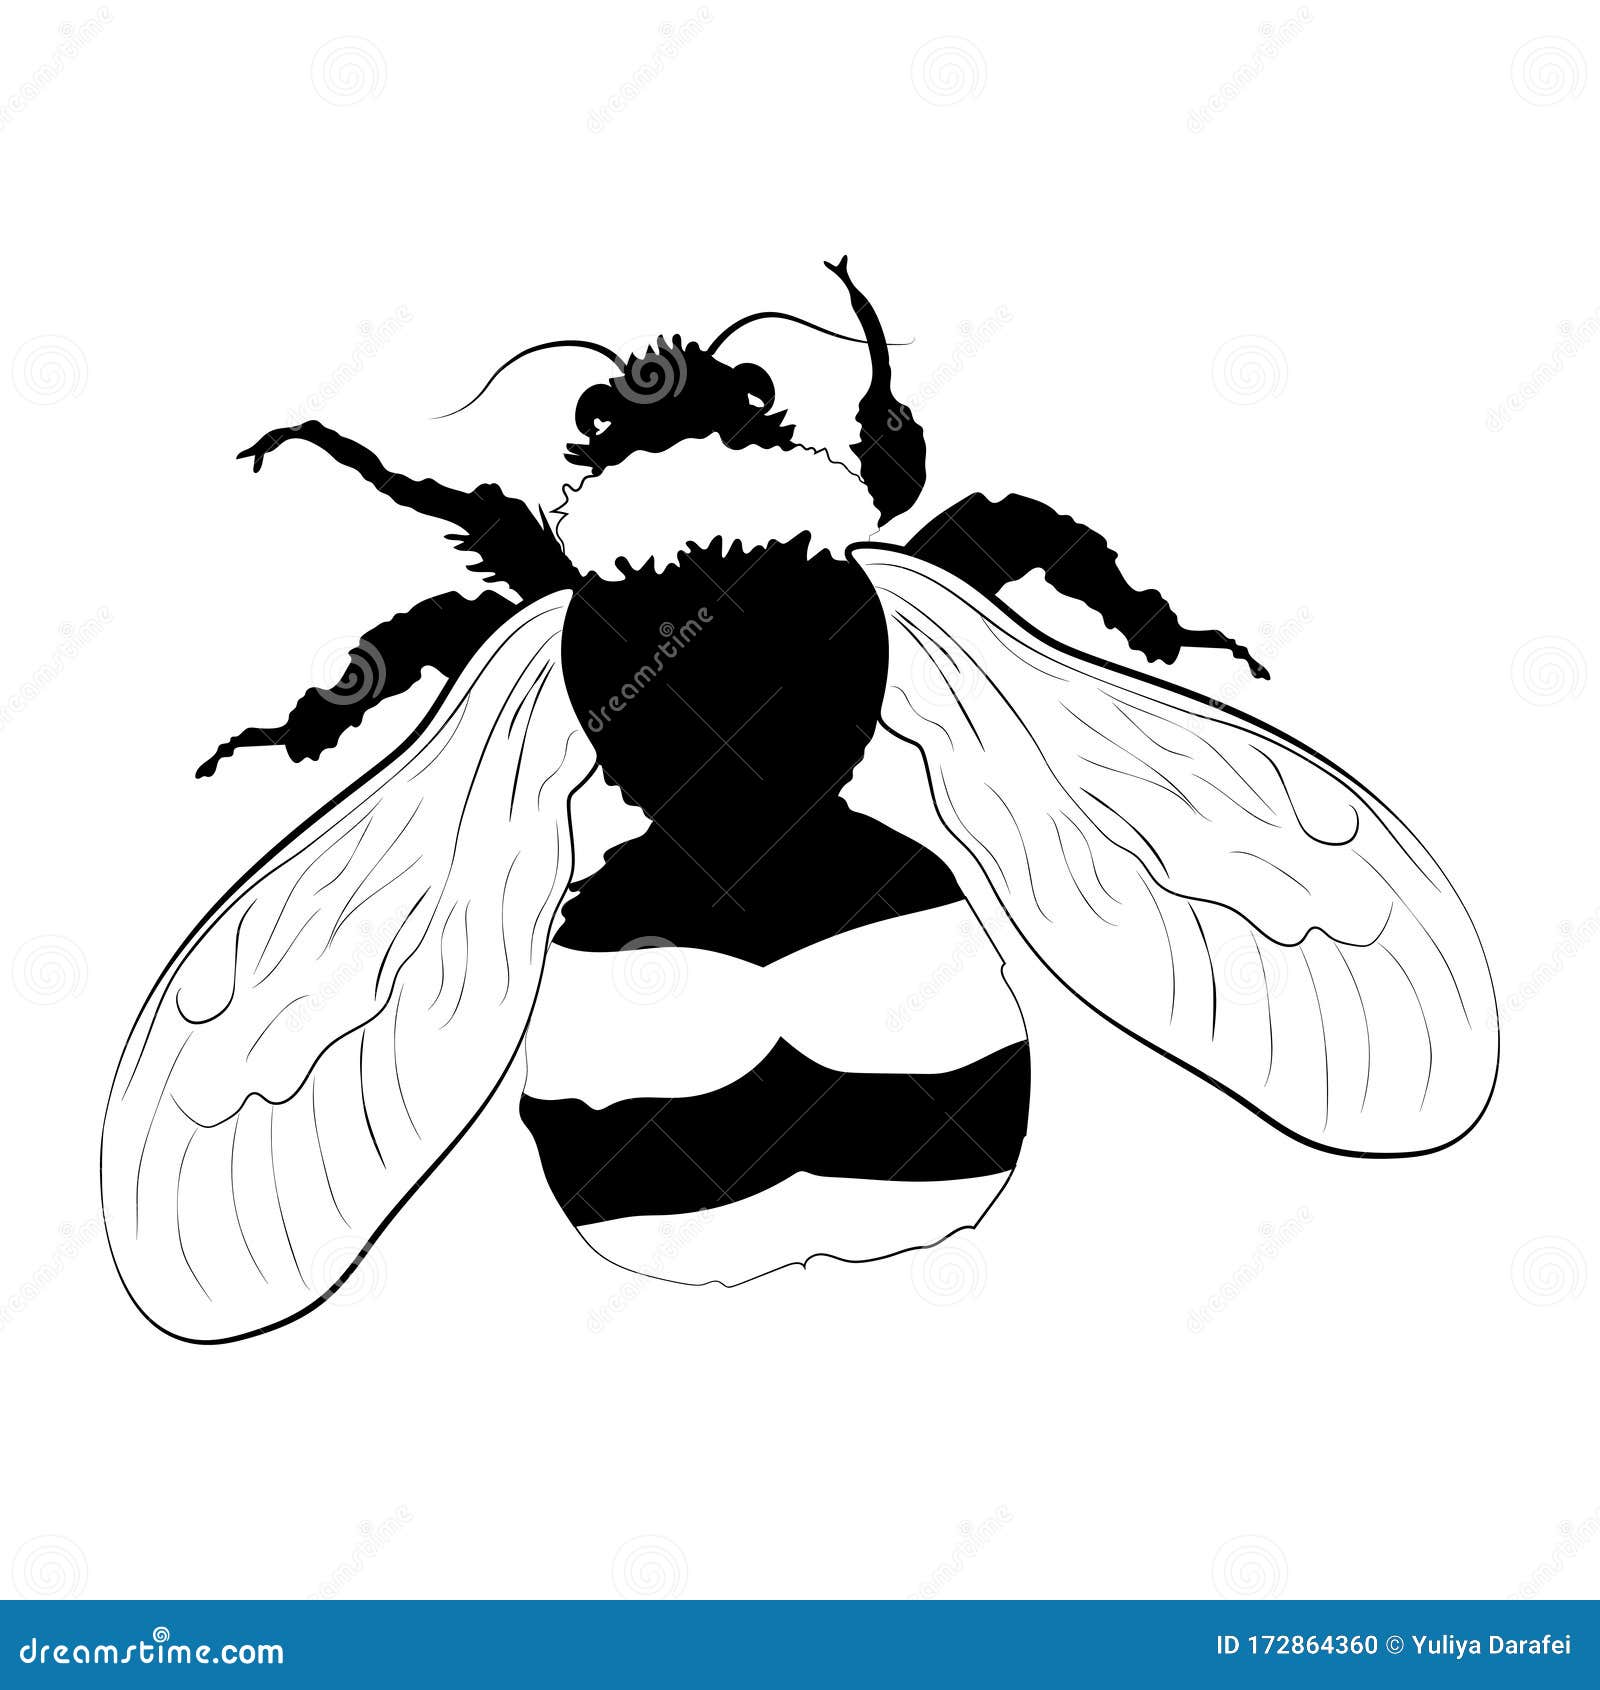 Download Bumblebee Silhouette Isolated On White Background. Stock ...